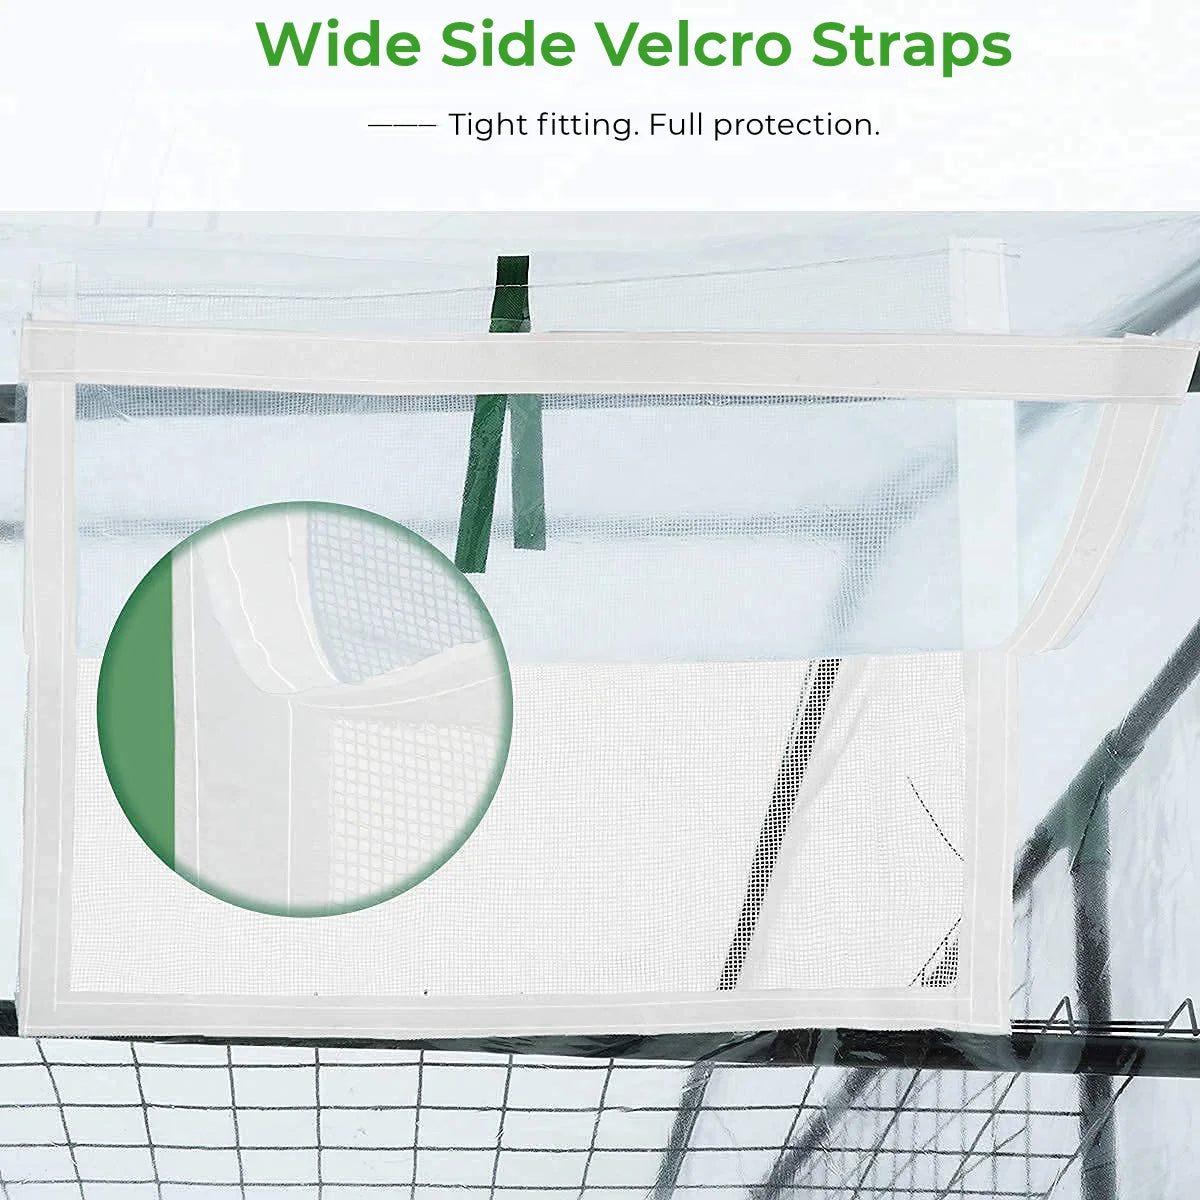 upgraded Wide Side Velcro Straps